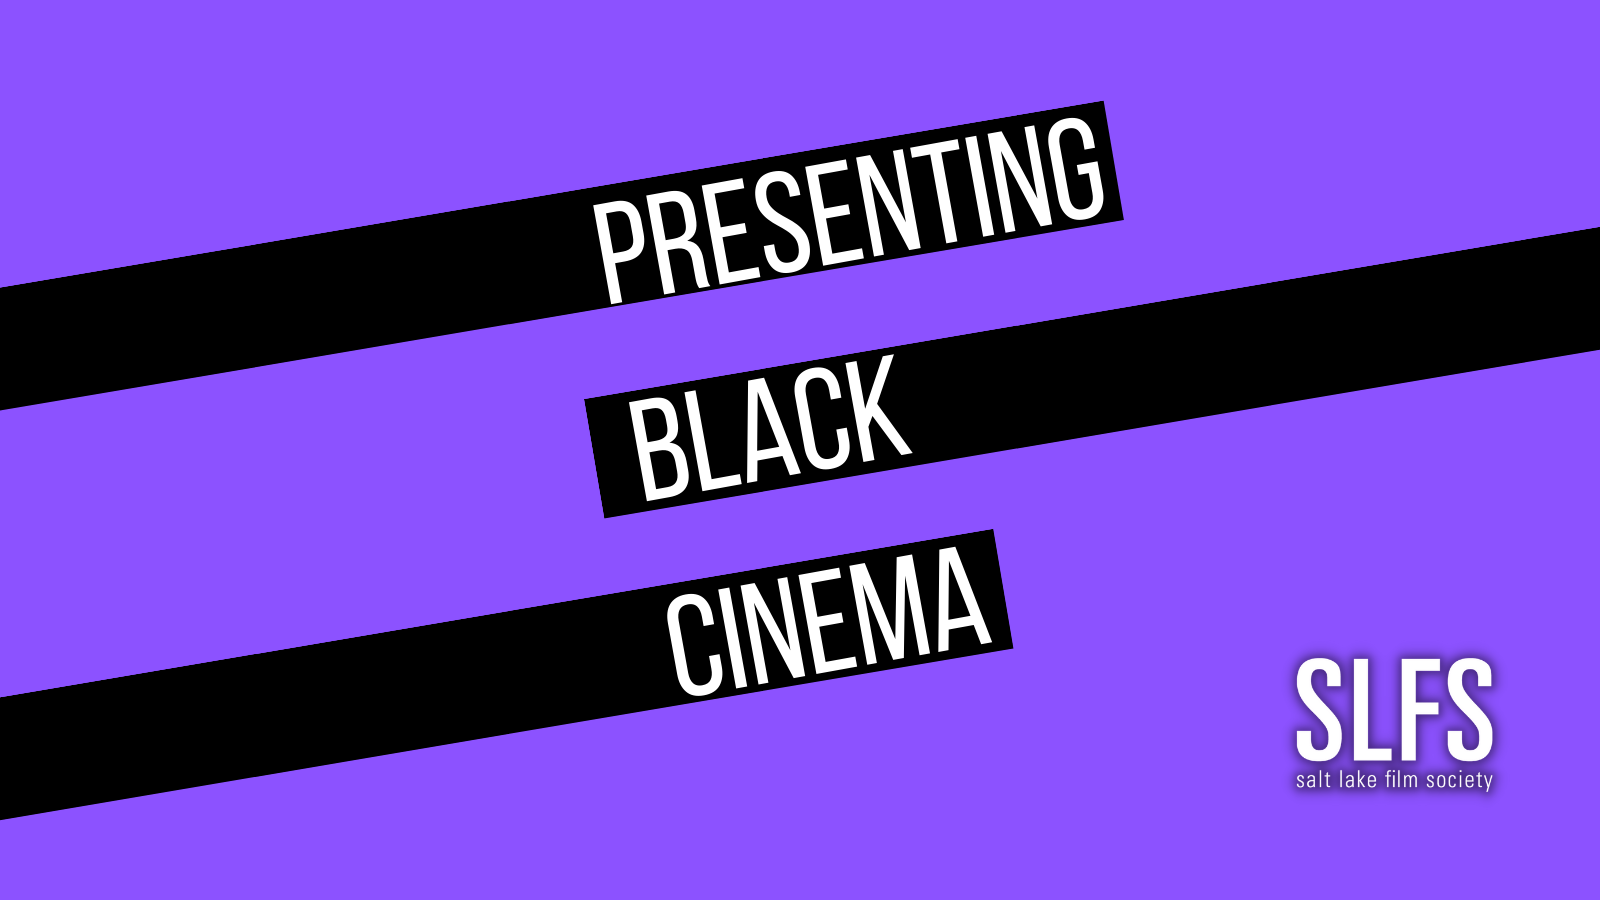 Purple background with Presenting Black Cinema in all caps on three different lines with black bars covering each word